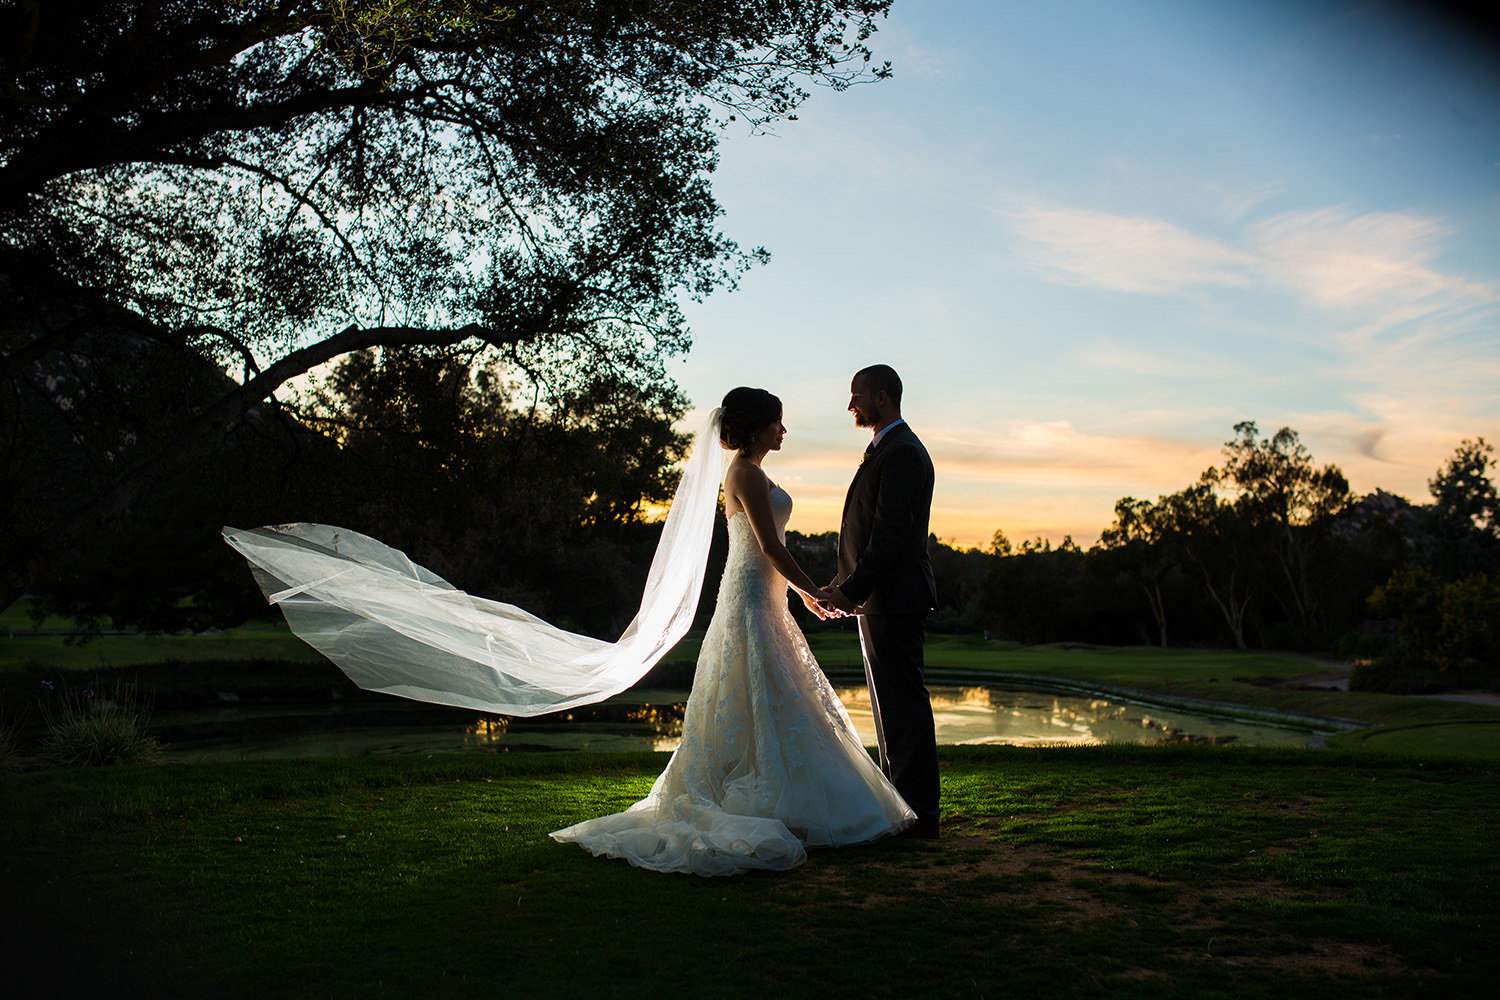 sunset image of bride and groom